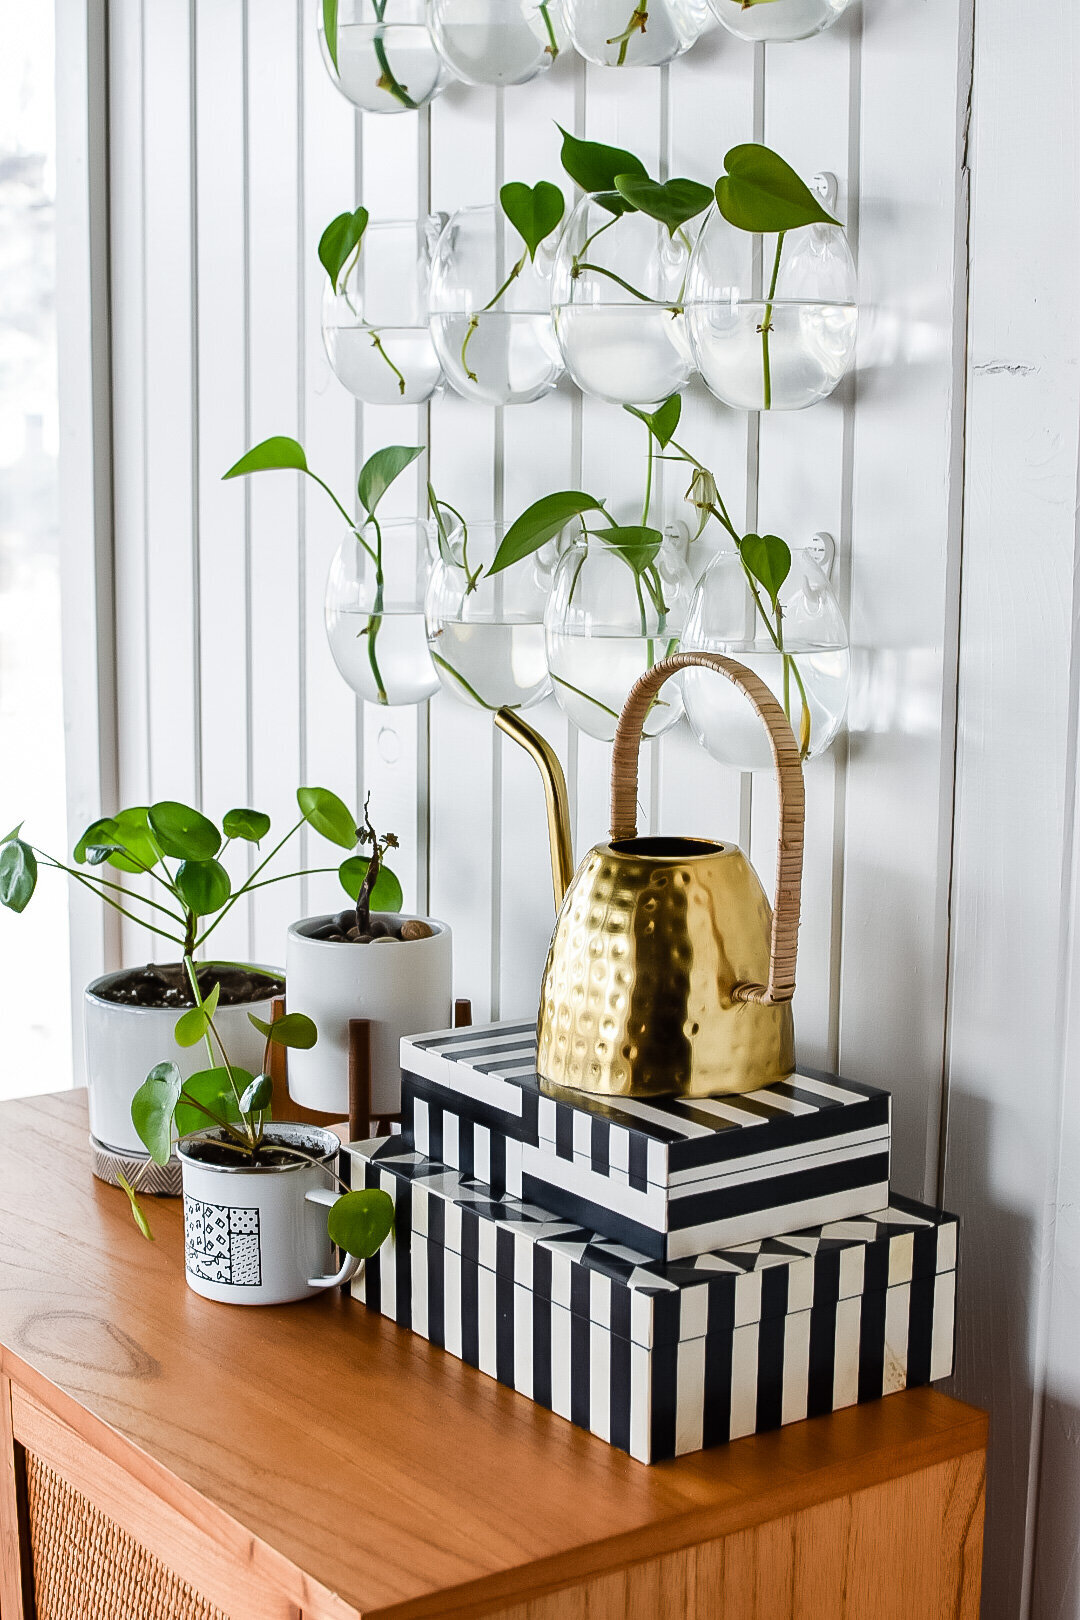 A metal watering can sits on top of two striped decorative boxes